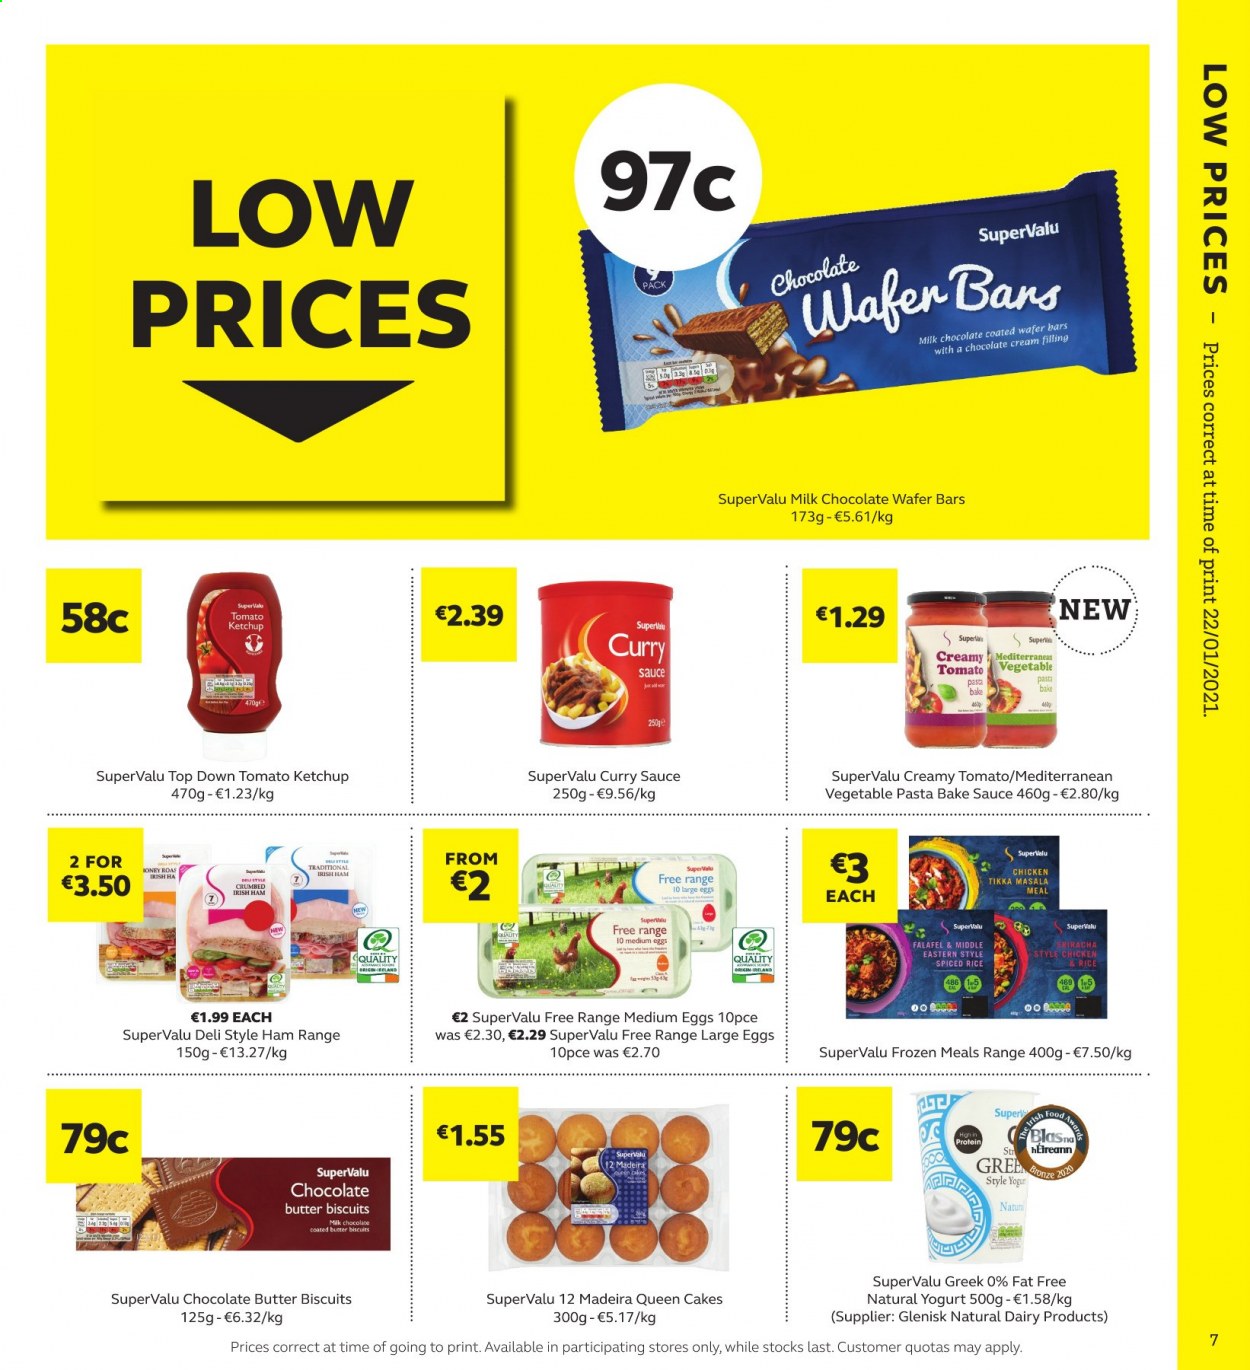 thumbnail - SuperValu offer  - 11.02.2021 - 24.02.2021 - Sales products - cake, sauce, ham, yoghurt, large eggs, butter, milk chocolate, wafers, biscuit, rice, pasta, Tikka Masala, ketchup. Page 7.